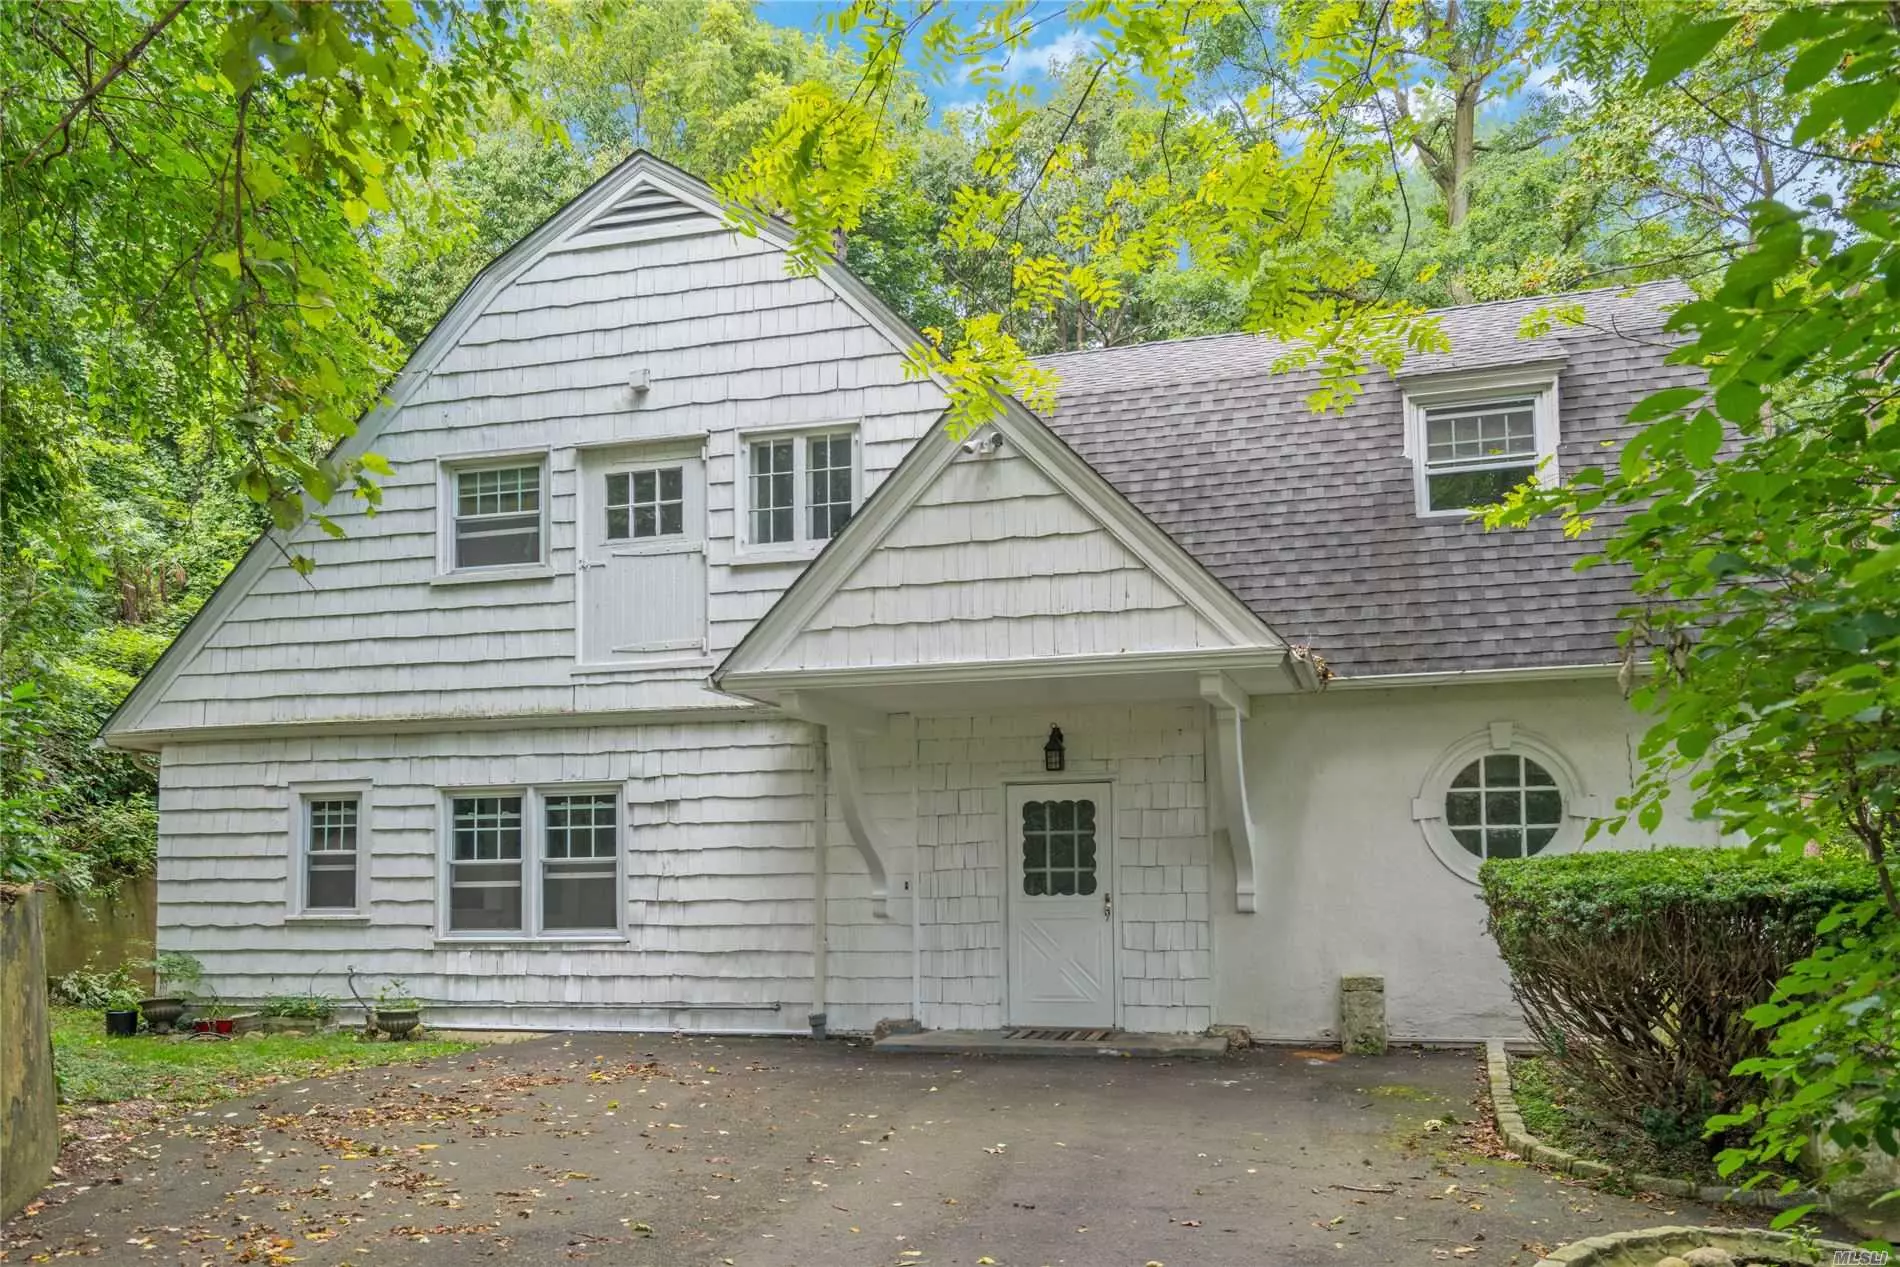 Absolutely Charming Old Carriage House with Water Views Of Oyster Bay Harbor. Master Bedroom With Full Bath, 2 Bedrooms And A Bath. Living Room with Fireplace, Dining Room And Spacious Kitchen.